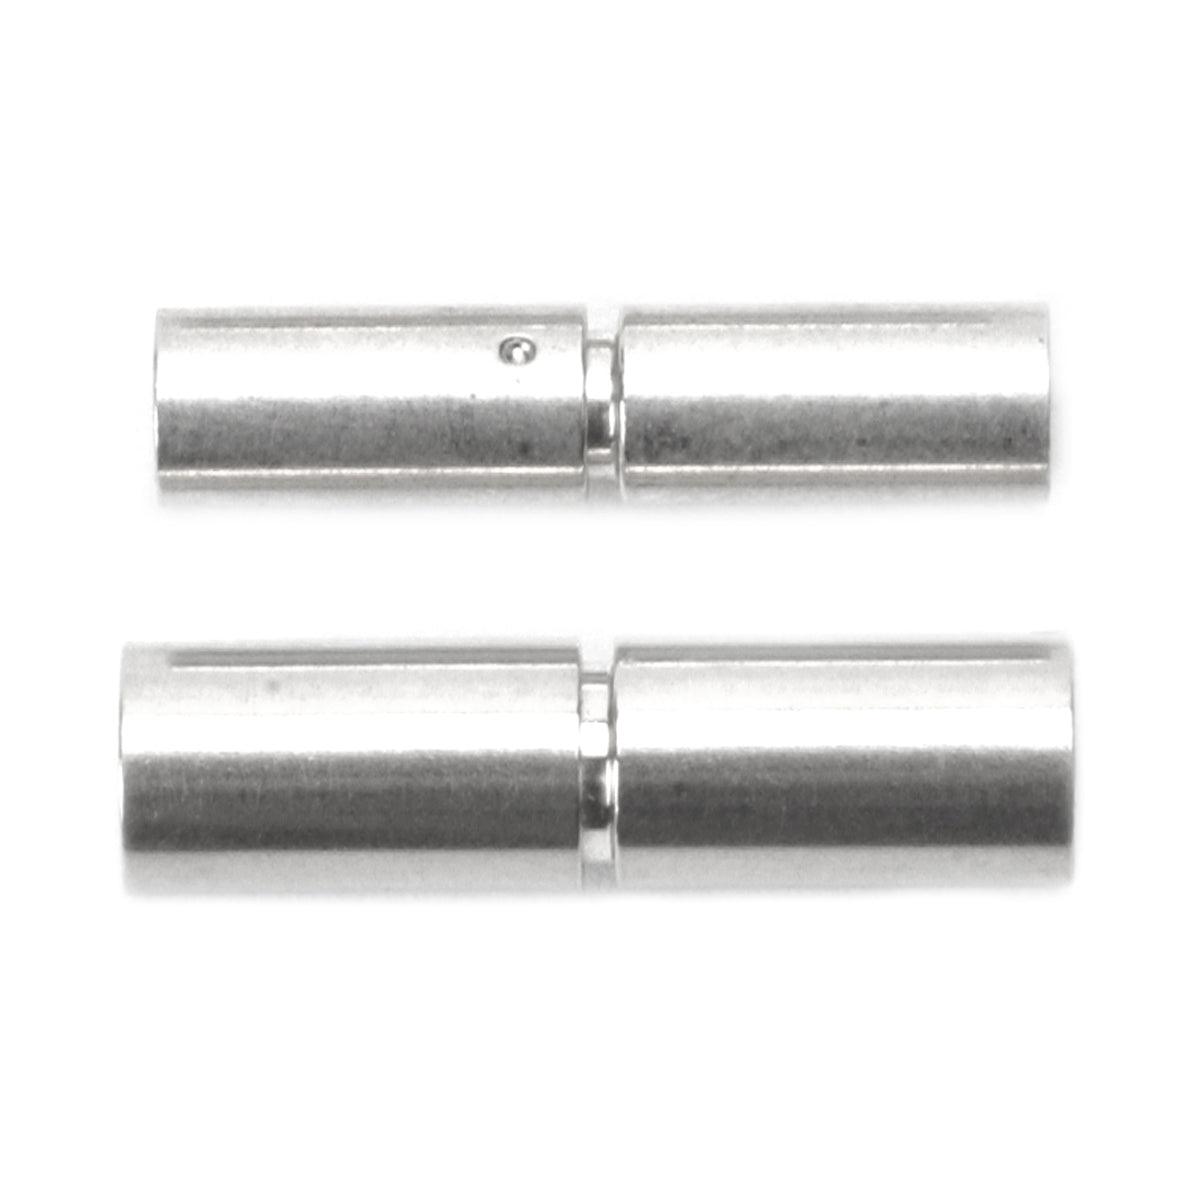 Closeout Sterling Silver Bayonet Clasp 3.5mm x 16mm-Made in Germany